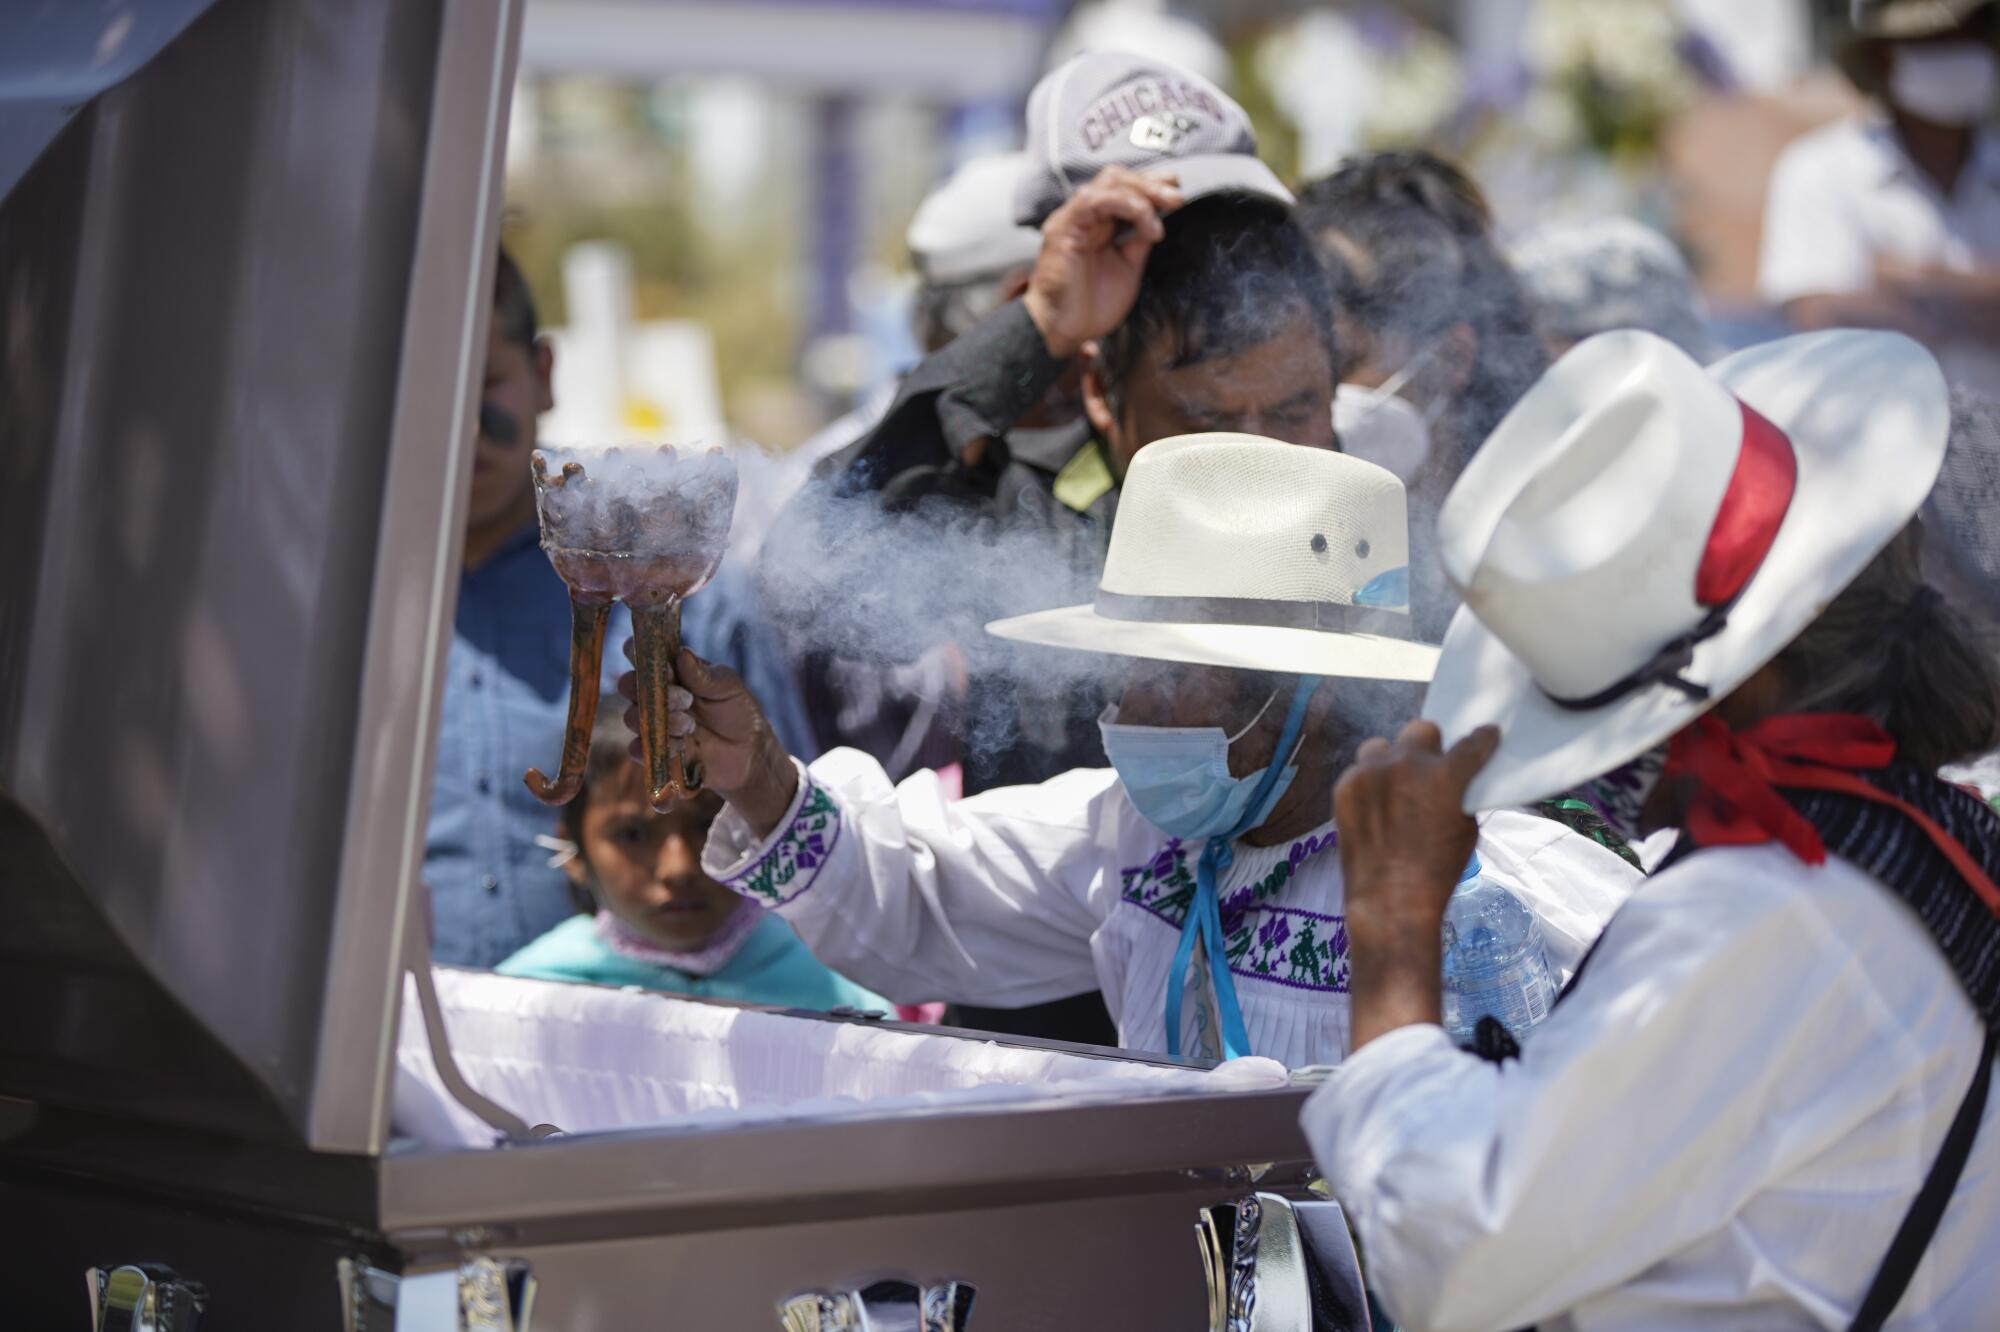 A woman holds an urn with incense and prays over the open casket of Maria Eugenia Chavez Segovia.